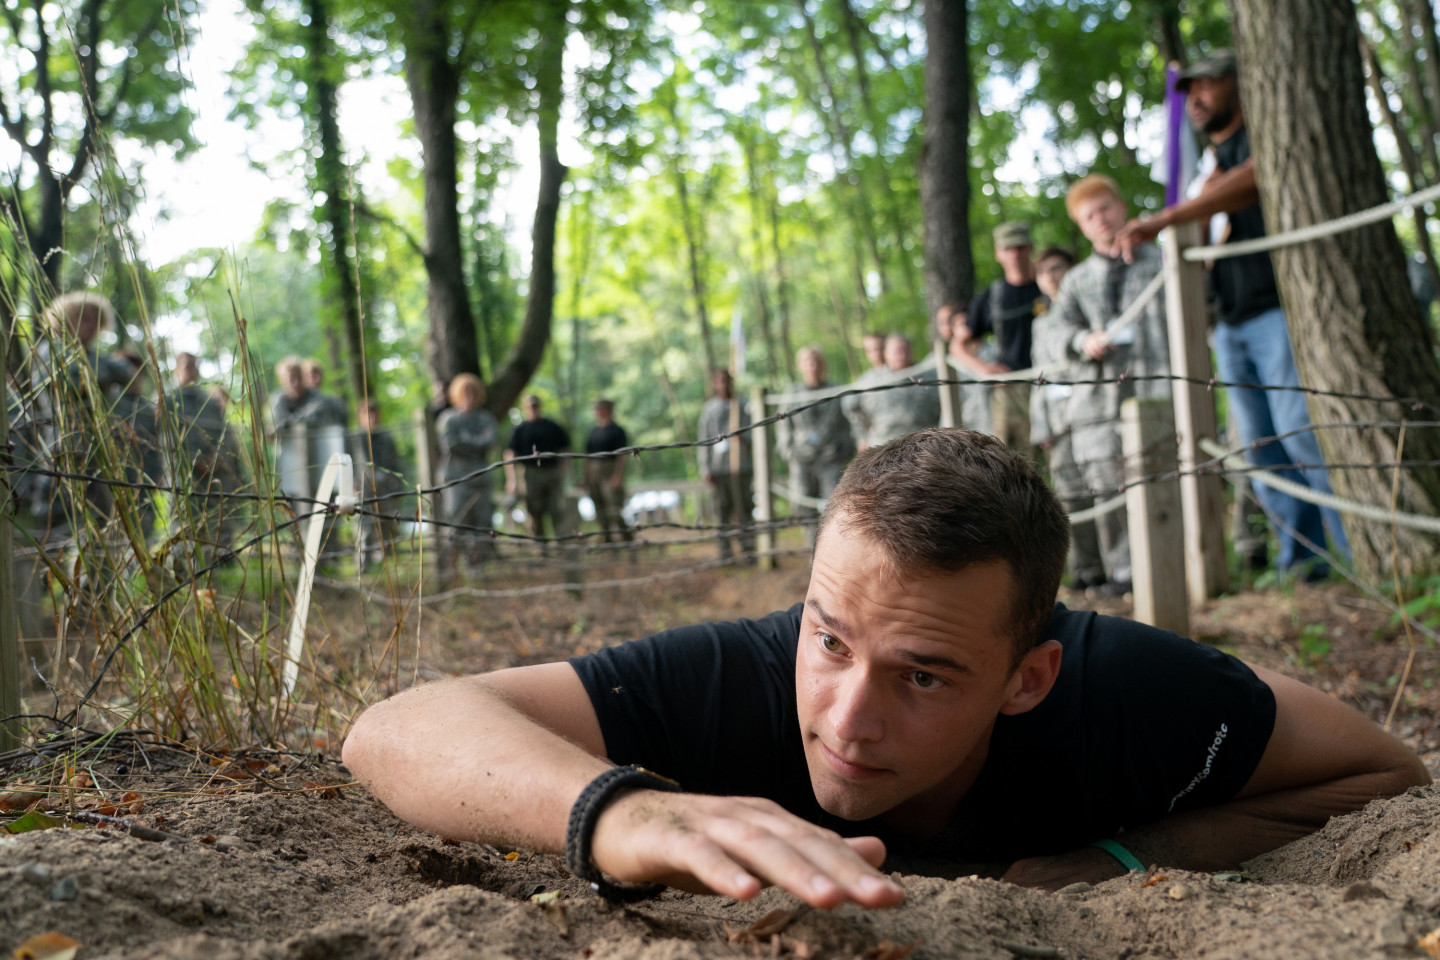 An ROTC cadet crawls under barbed wire on an obstacle course.